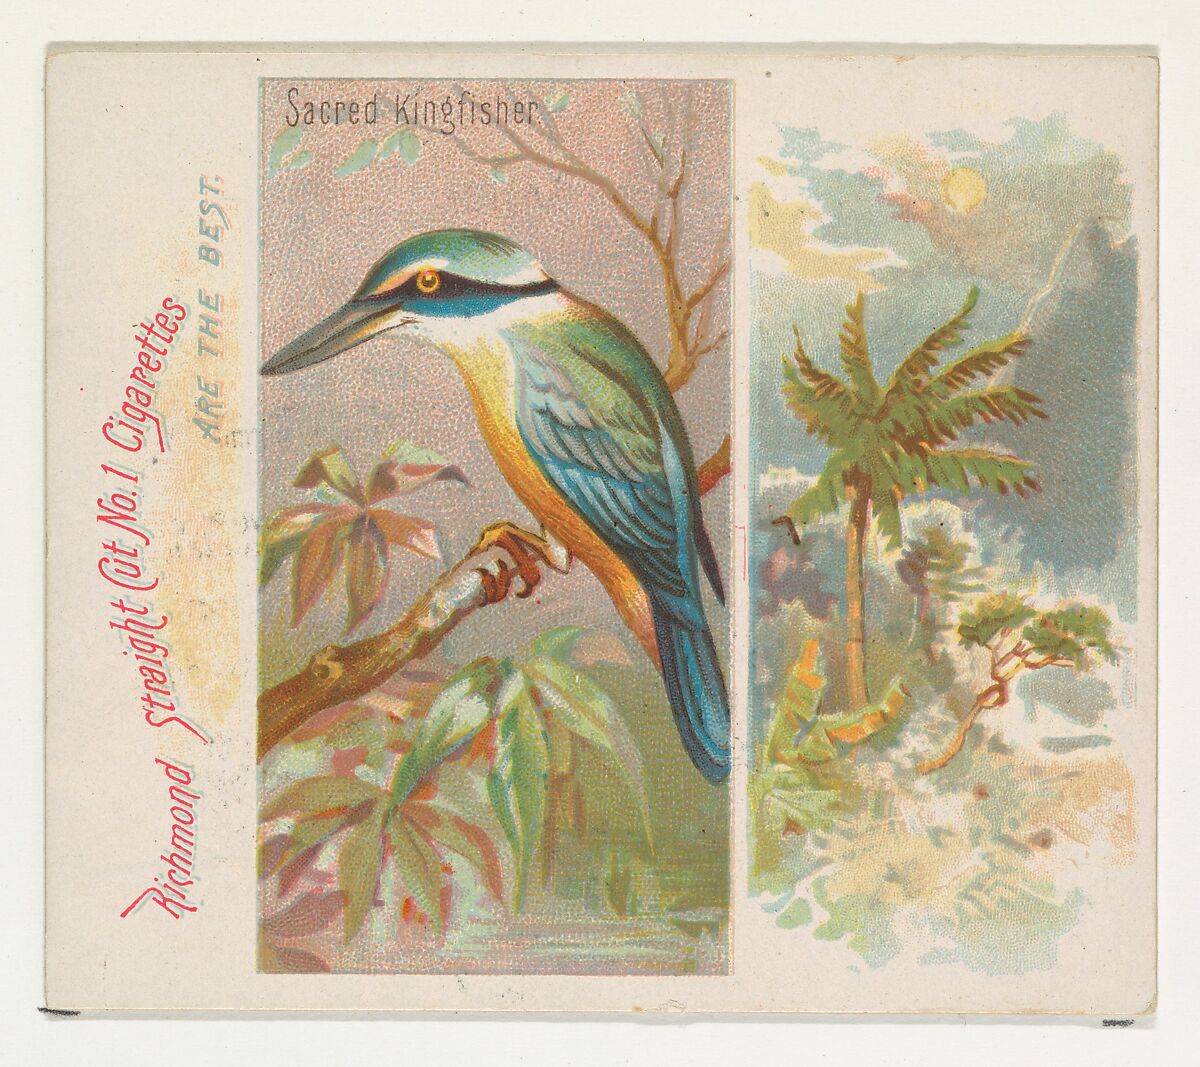 Sacred Kingfisher, from Birds of the Tropics series (N38) for Allen & Ginter Cigarettes, Issued by Allen &amp; Ginter (American, Richmond, Virginia), Commercial color lithograph 